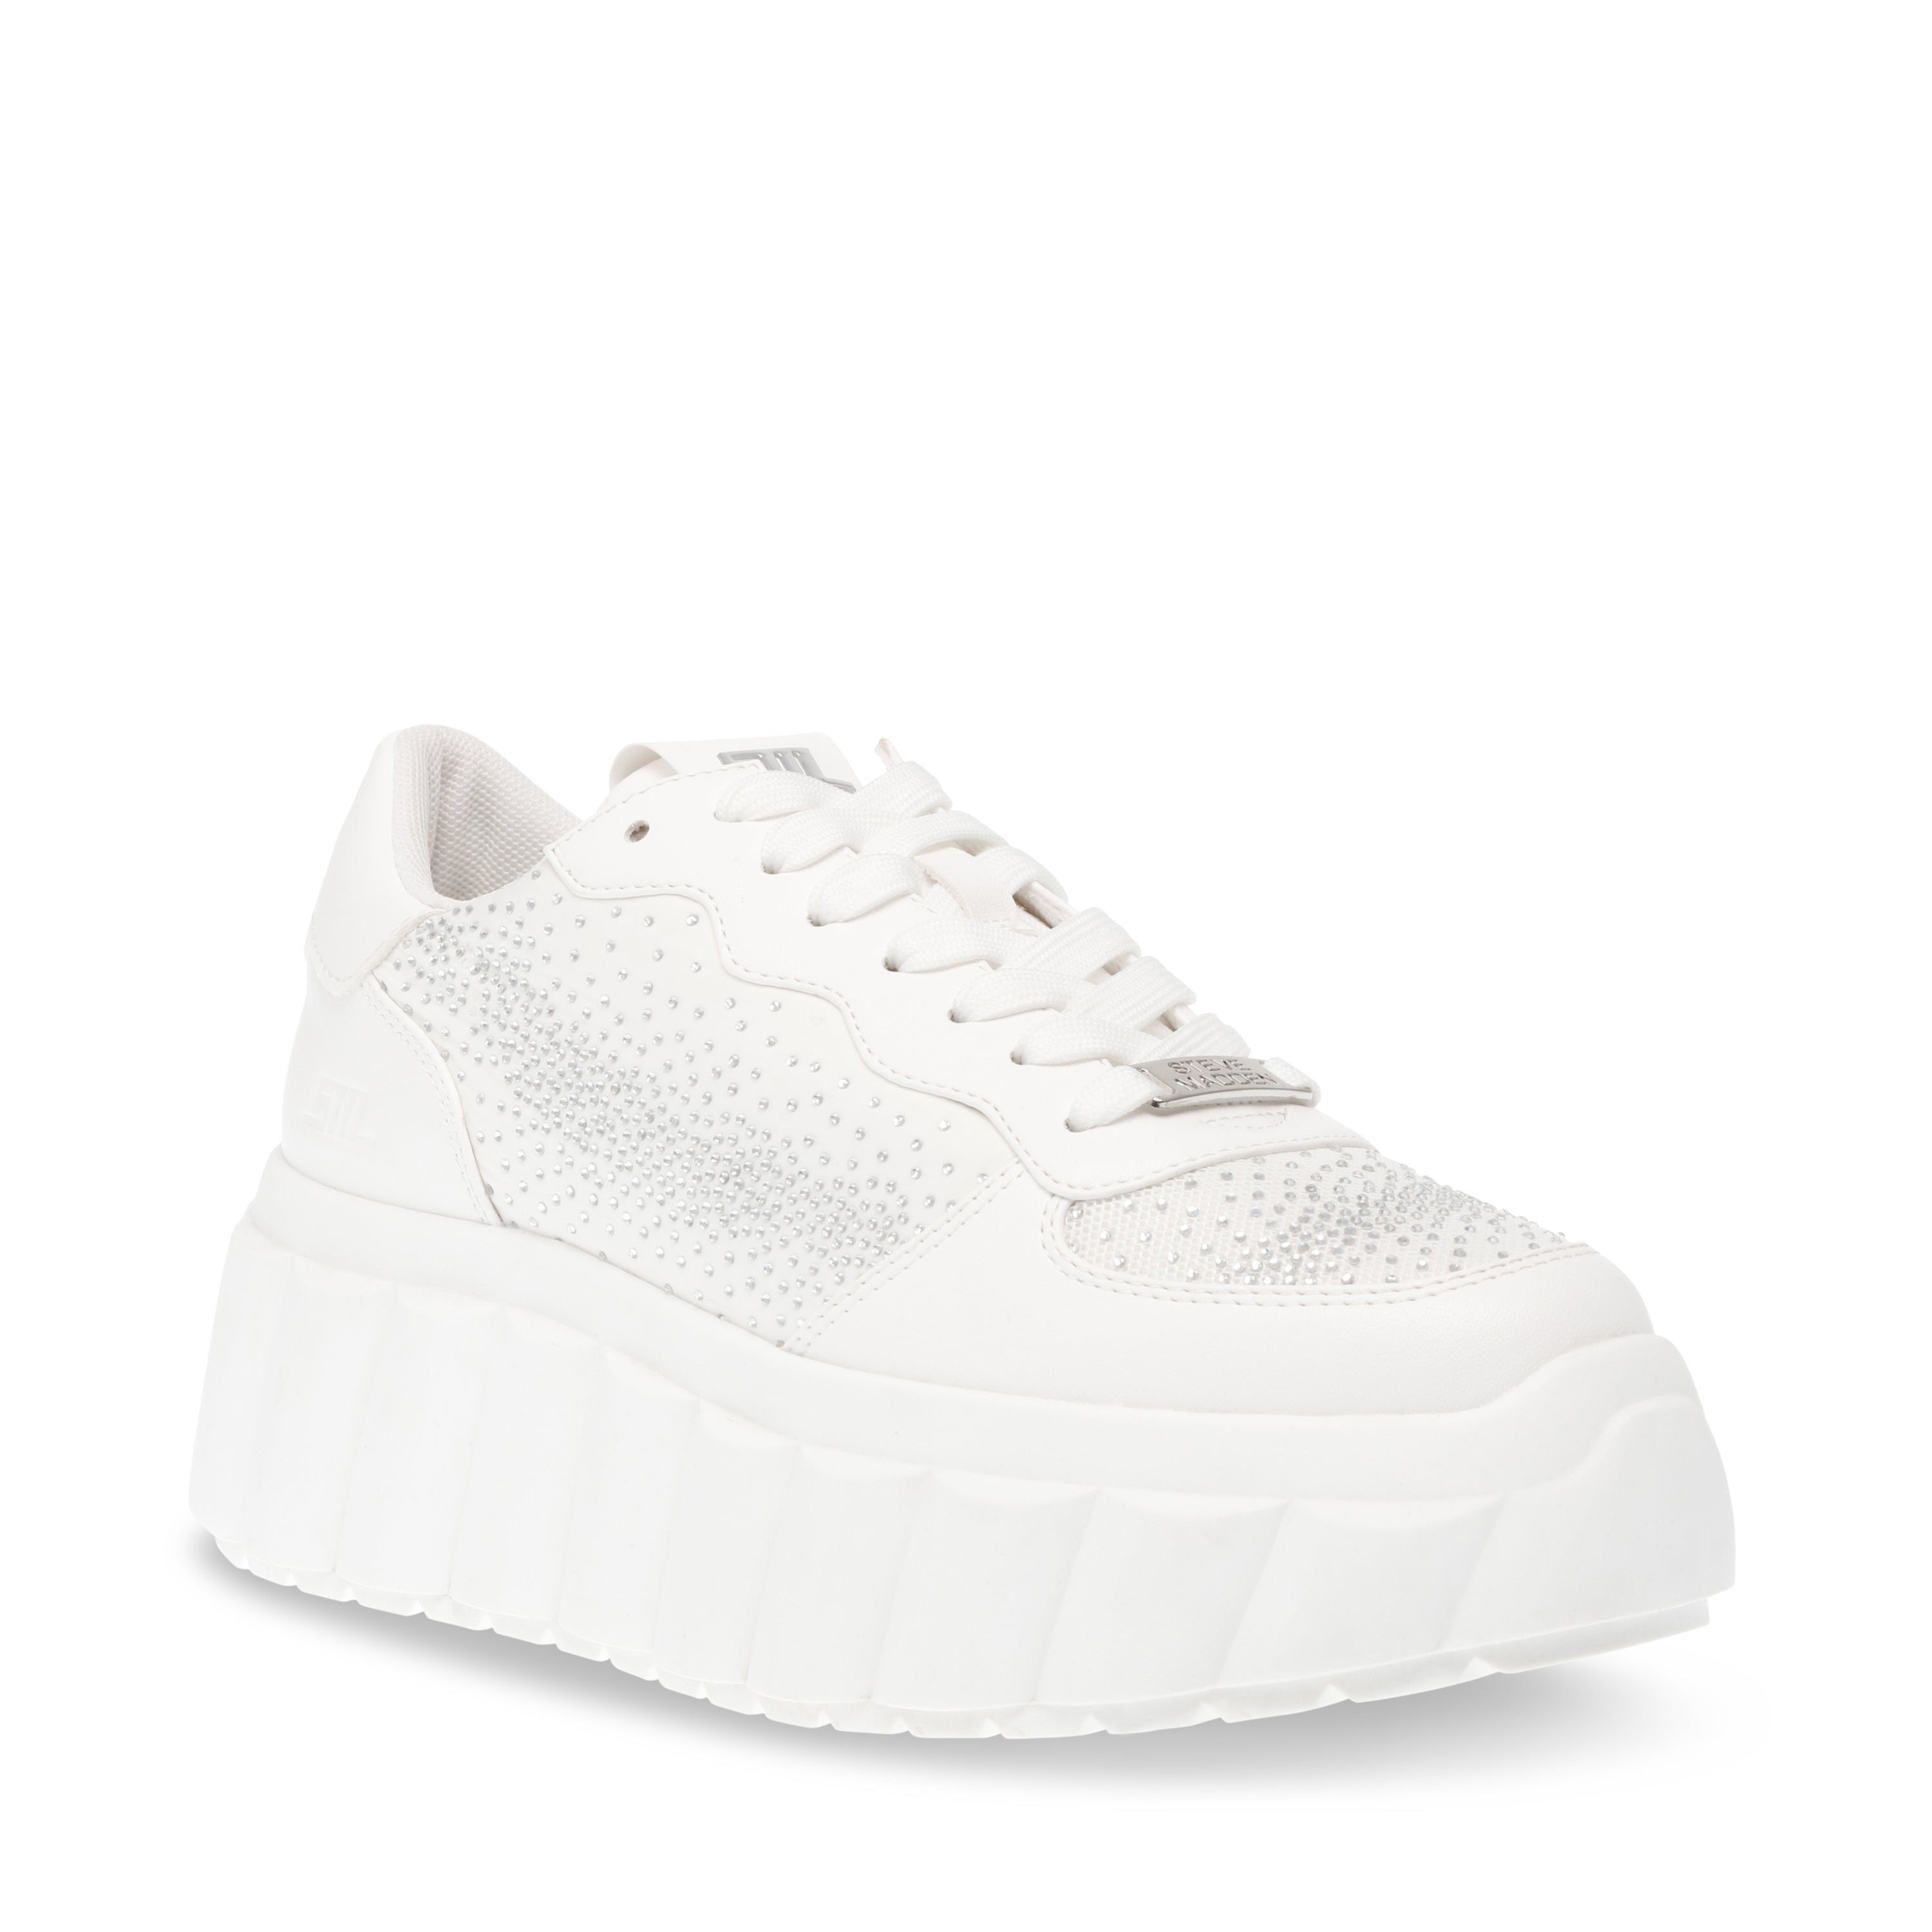 CLOUD NINE WHITE/WHITE SNEAKERS- Hover Image